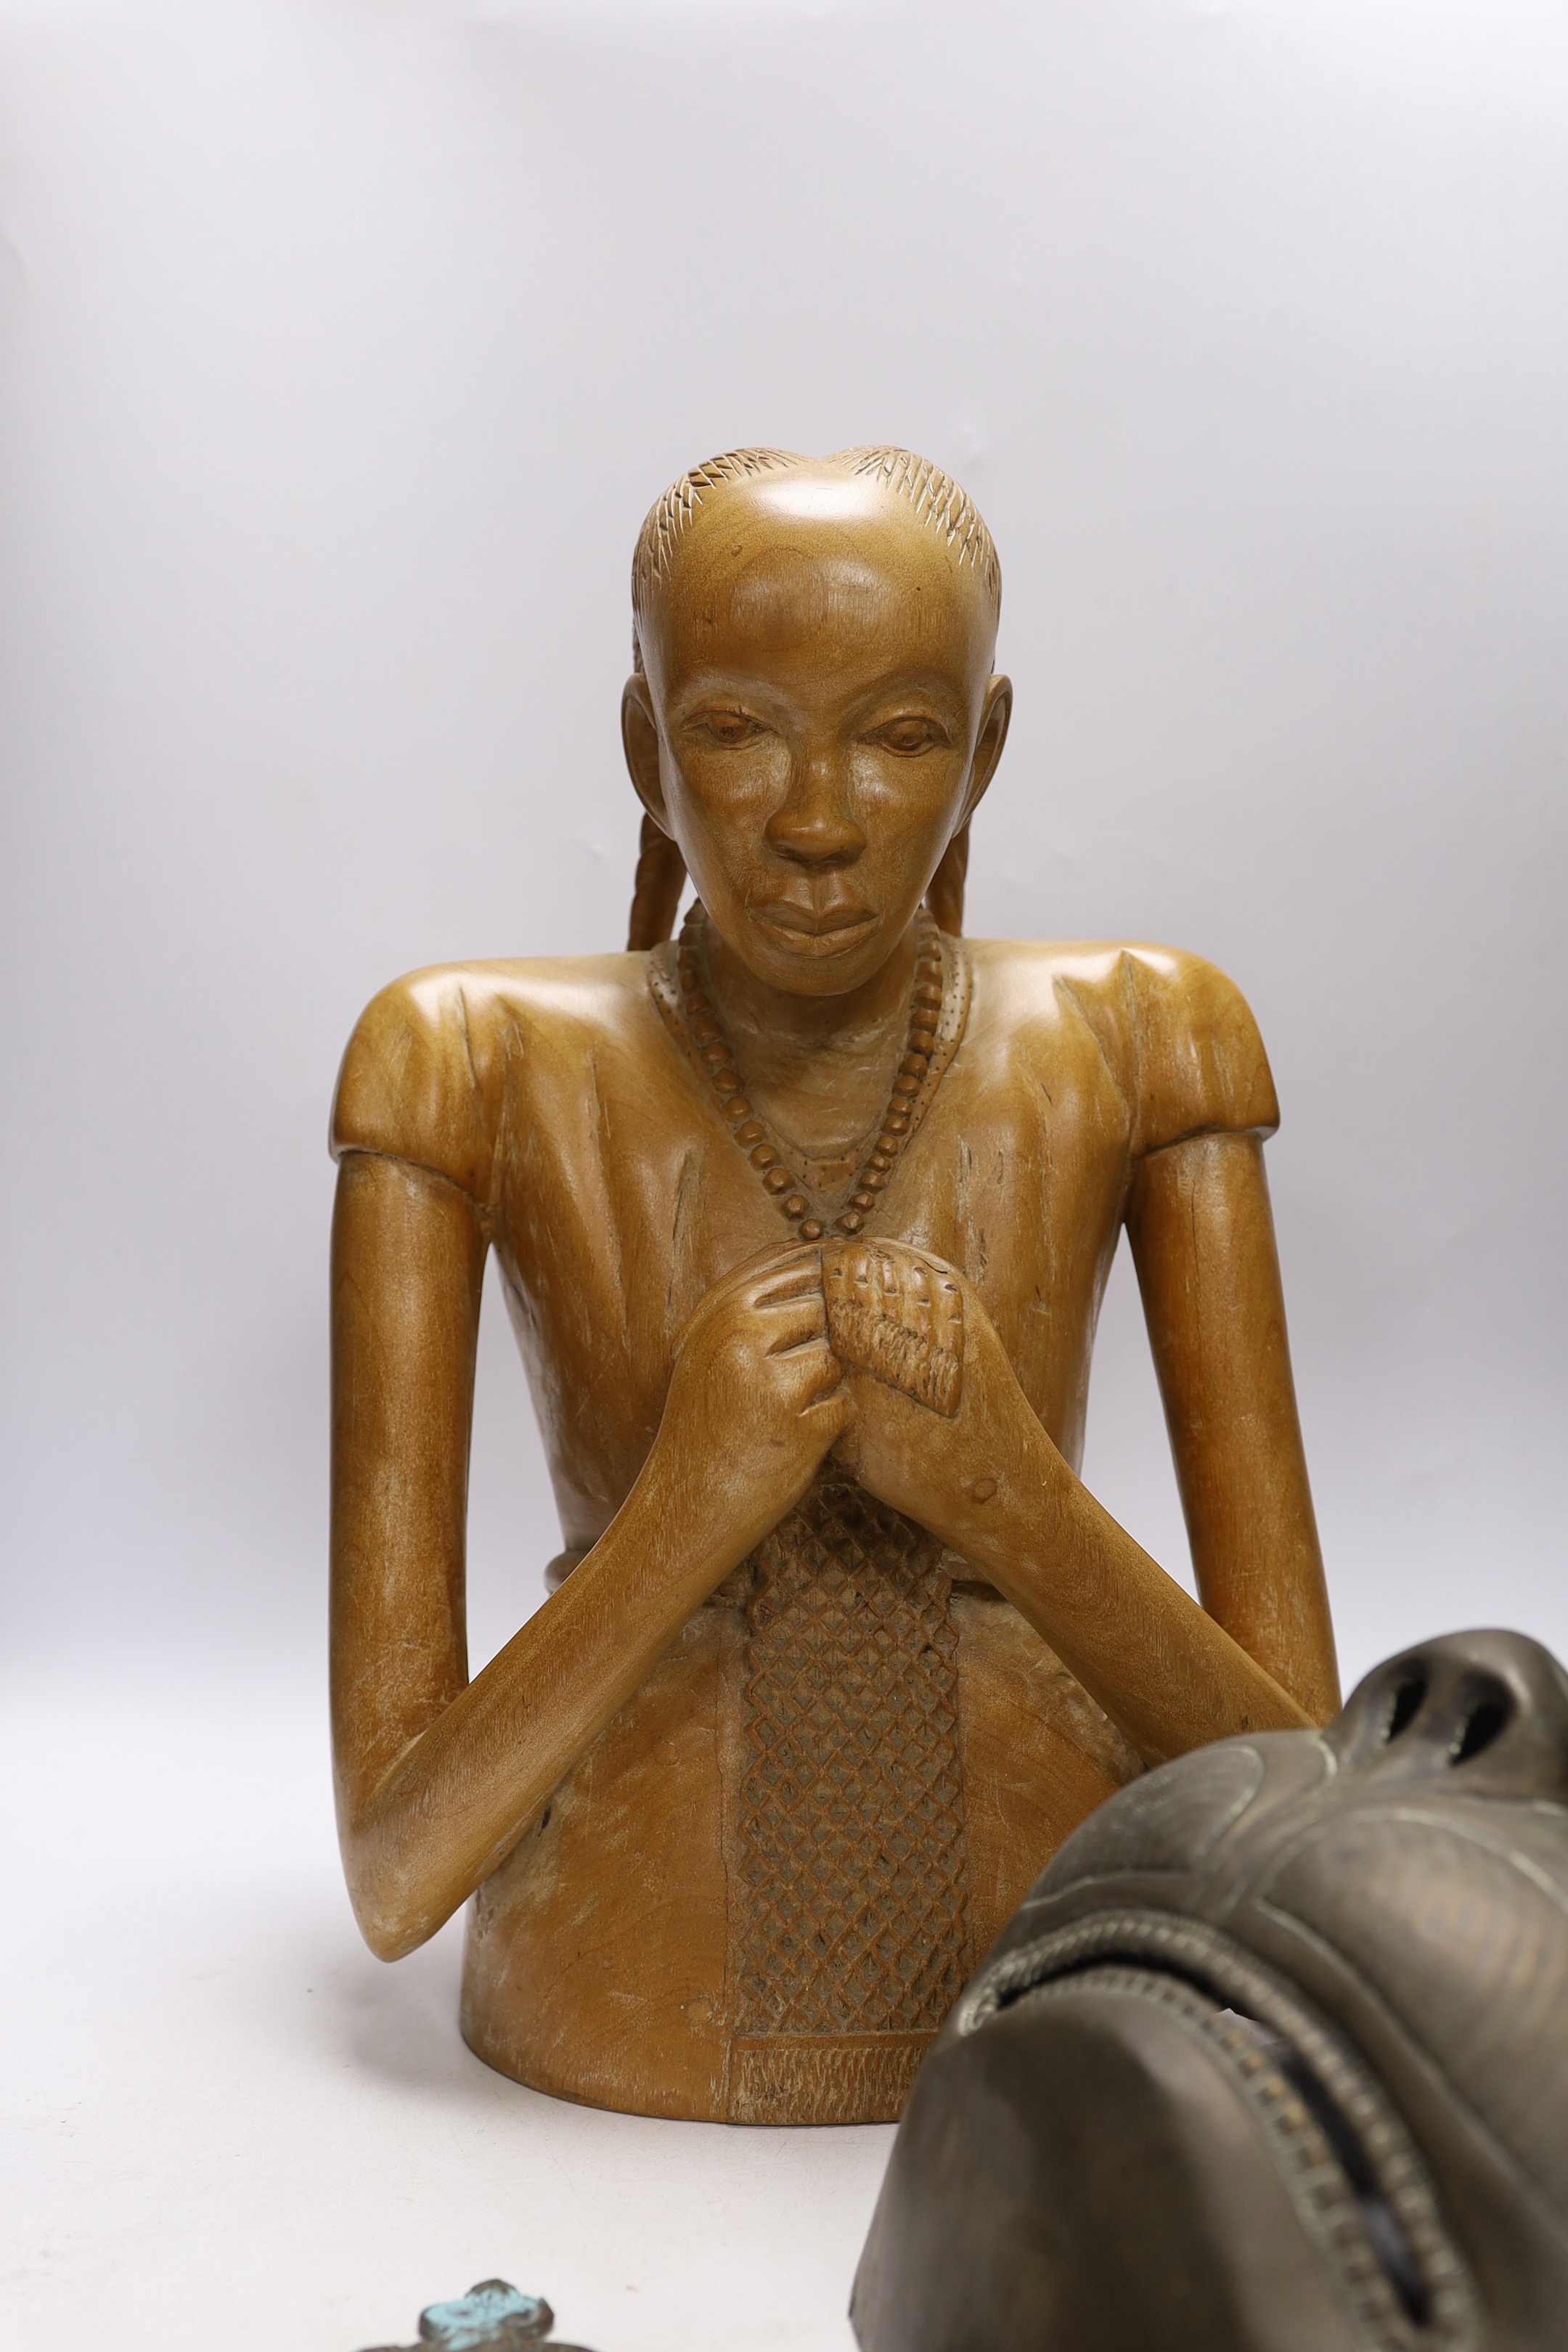 A West African carving of a girl, and a Balinese bust of a man together with an Indonesian metal mask and black lacquered spoon, mask 38cm high